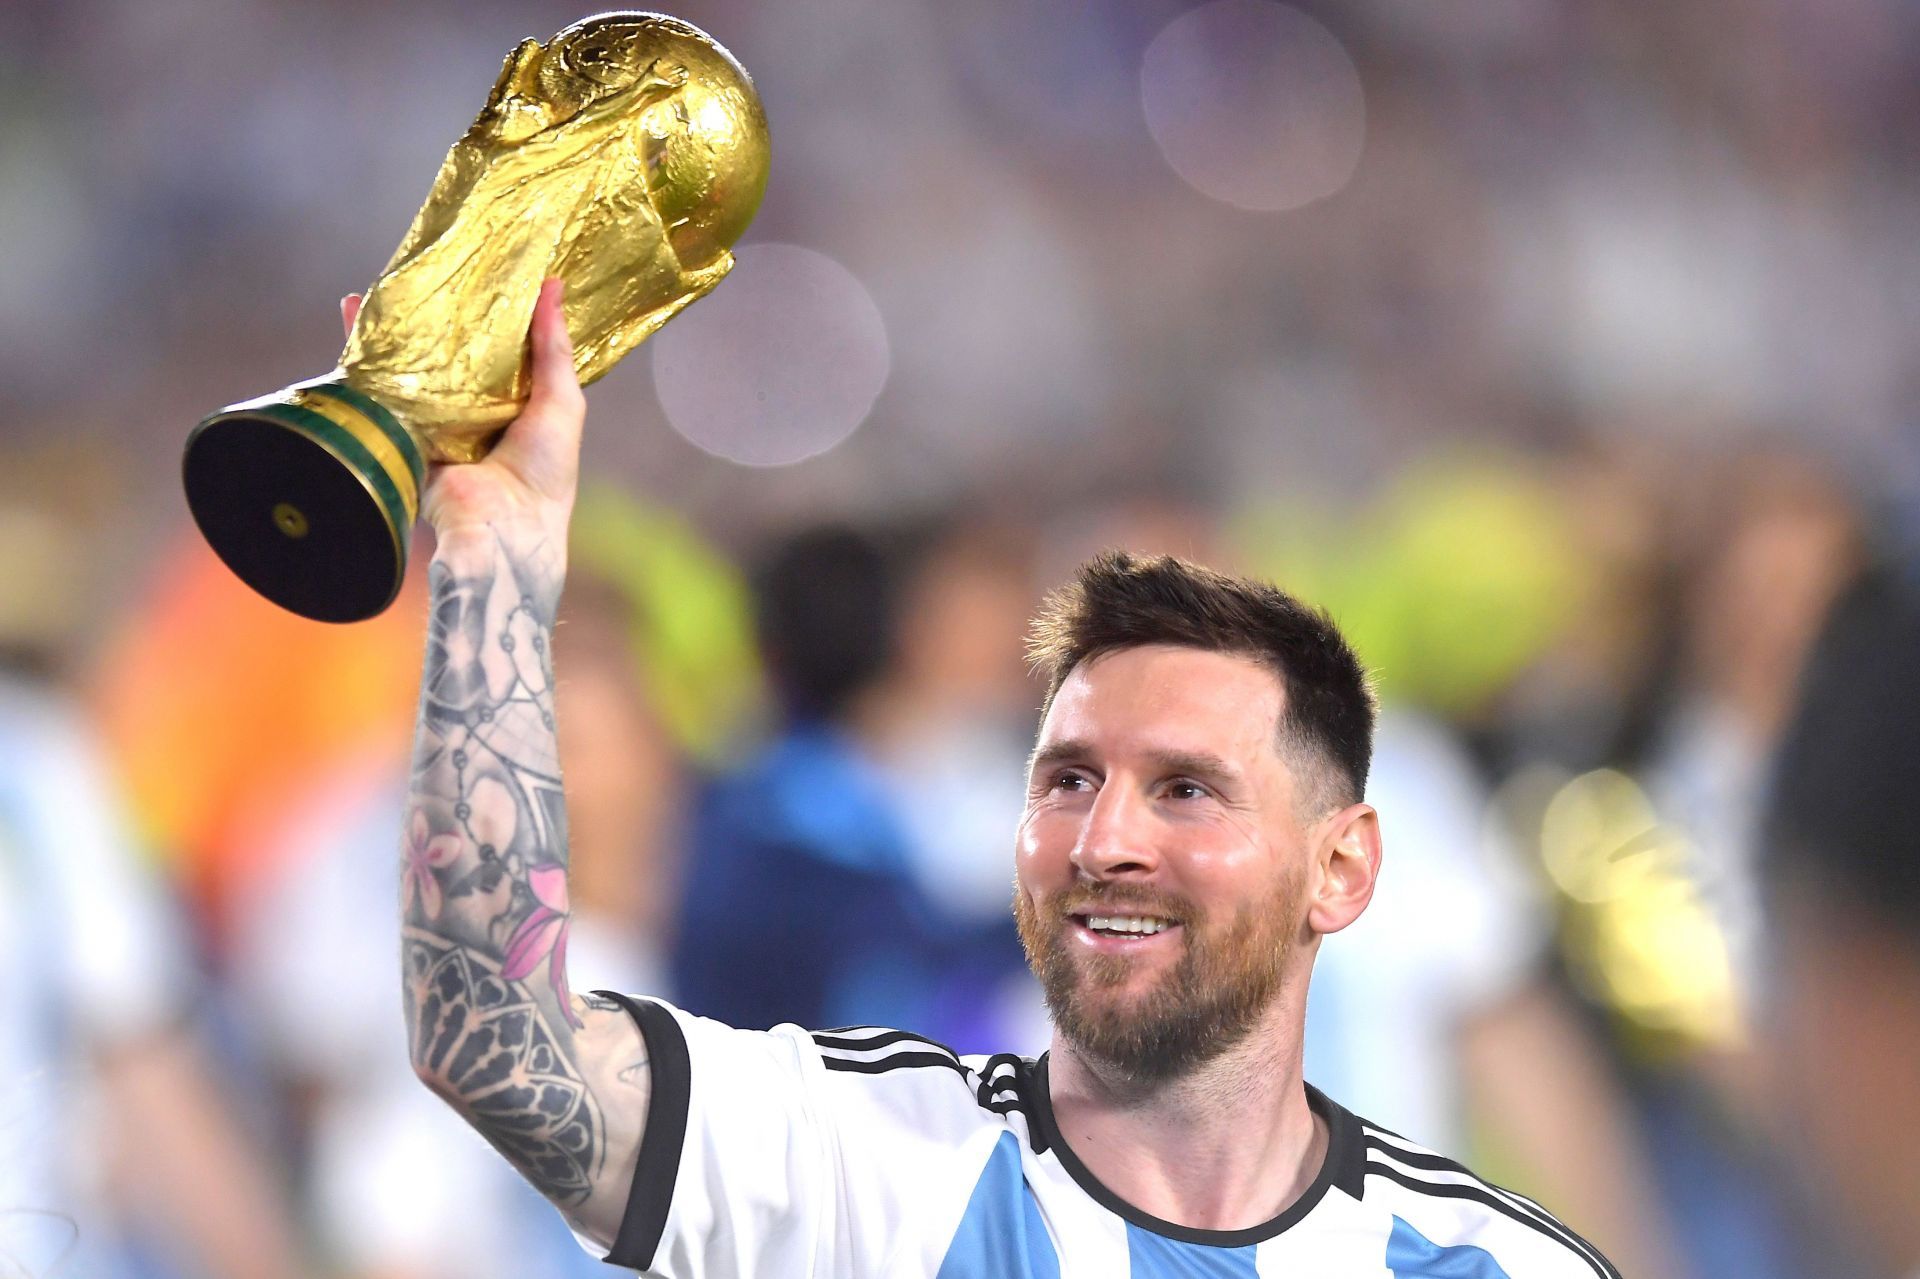 Lionel Messi paraded the World Cup at El Monumental.